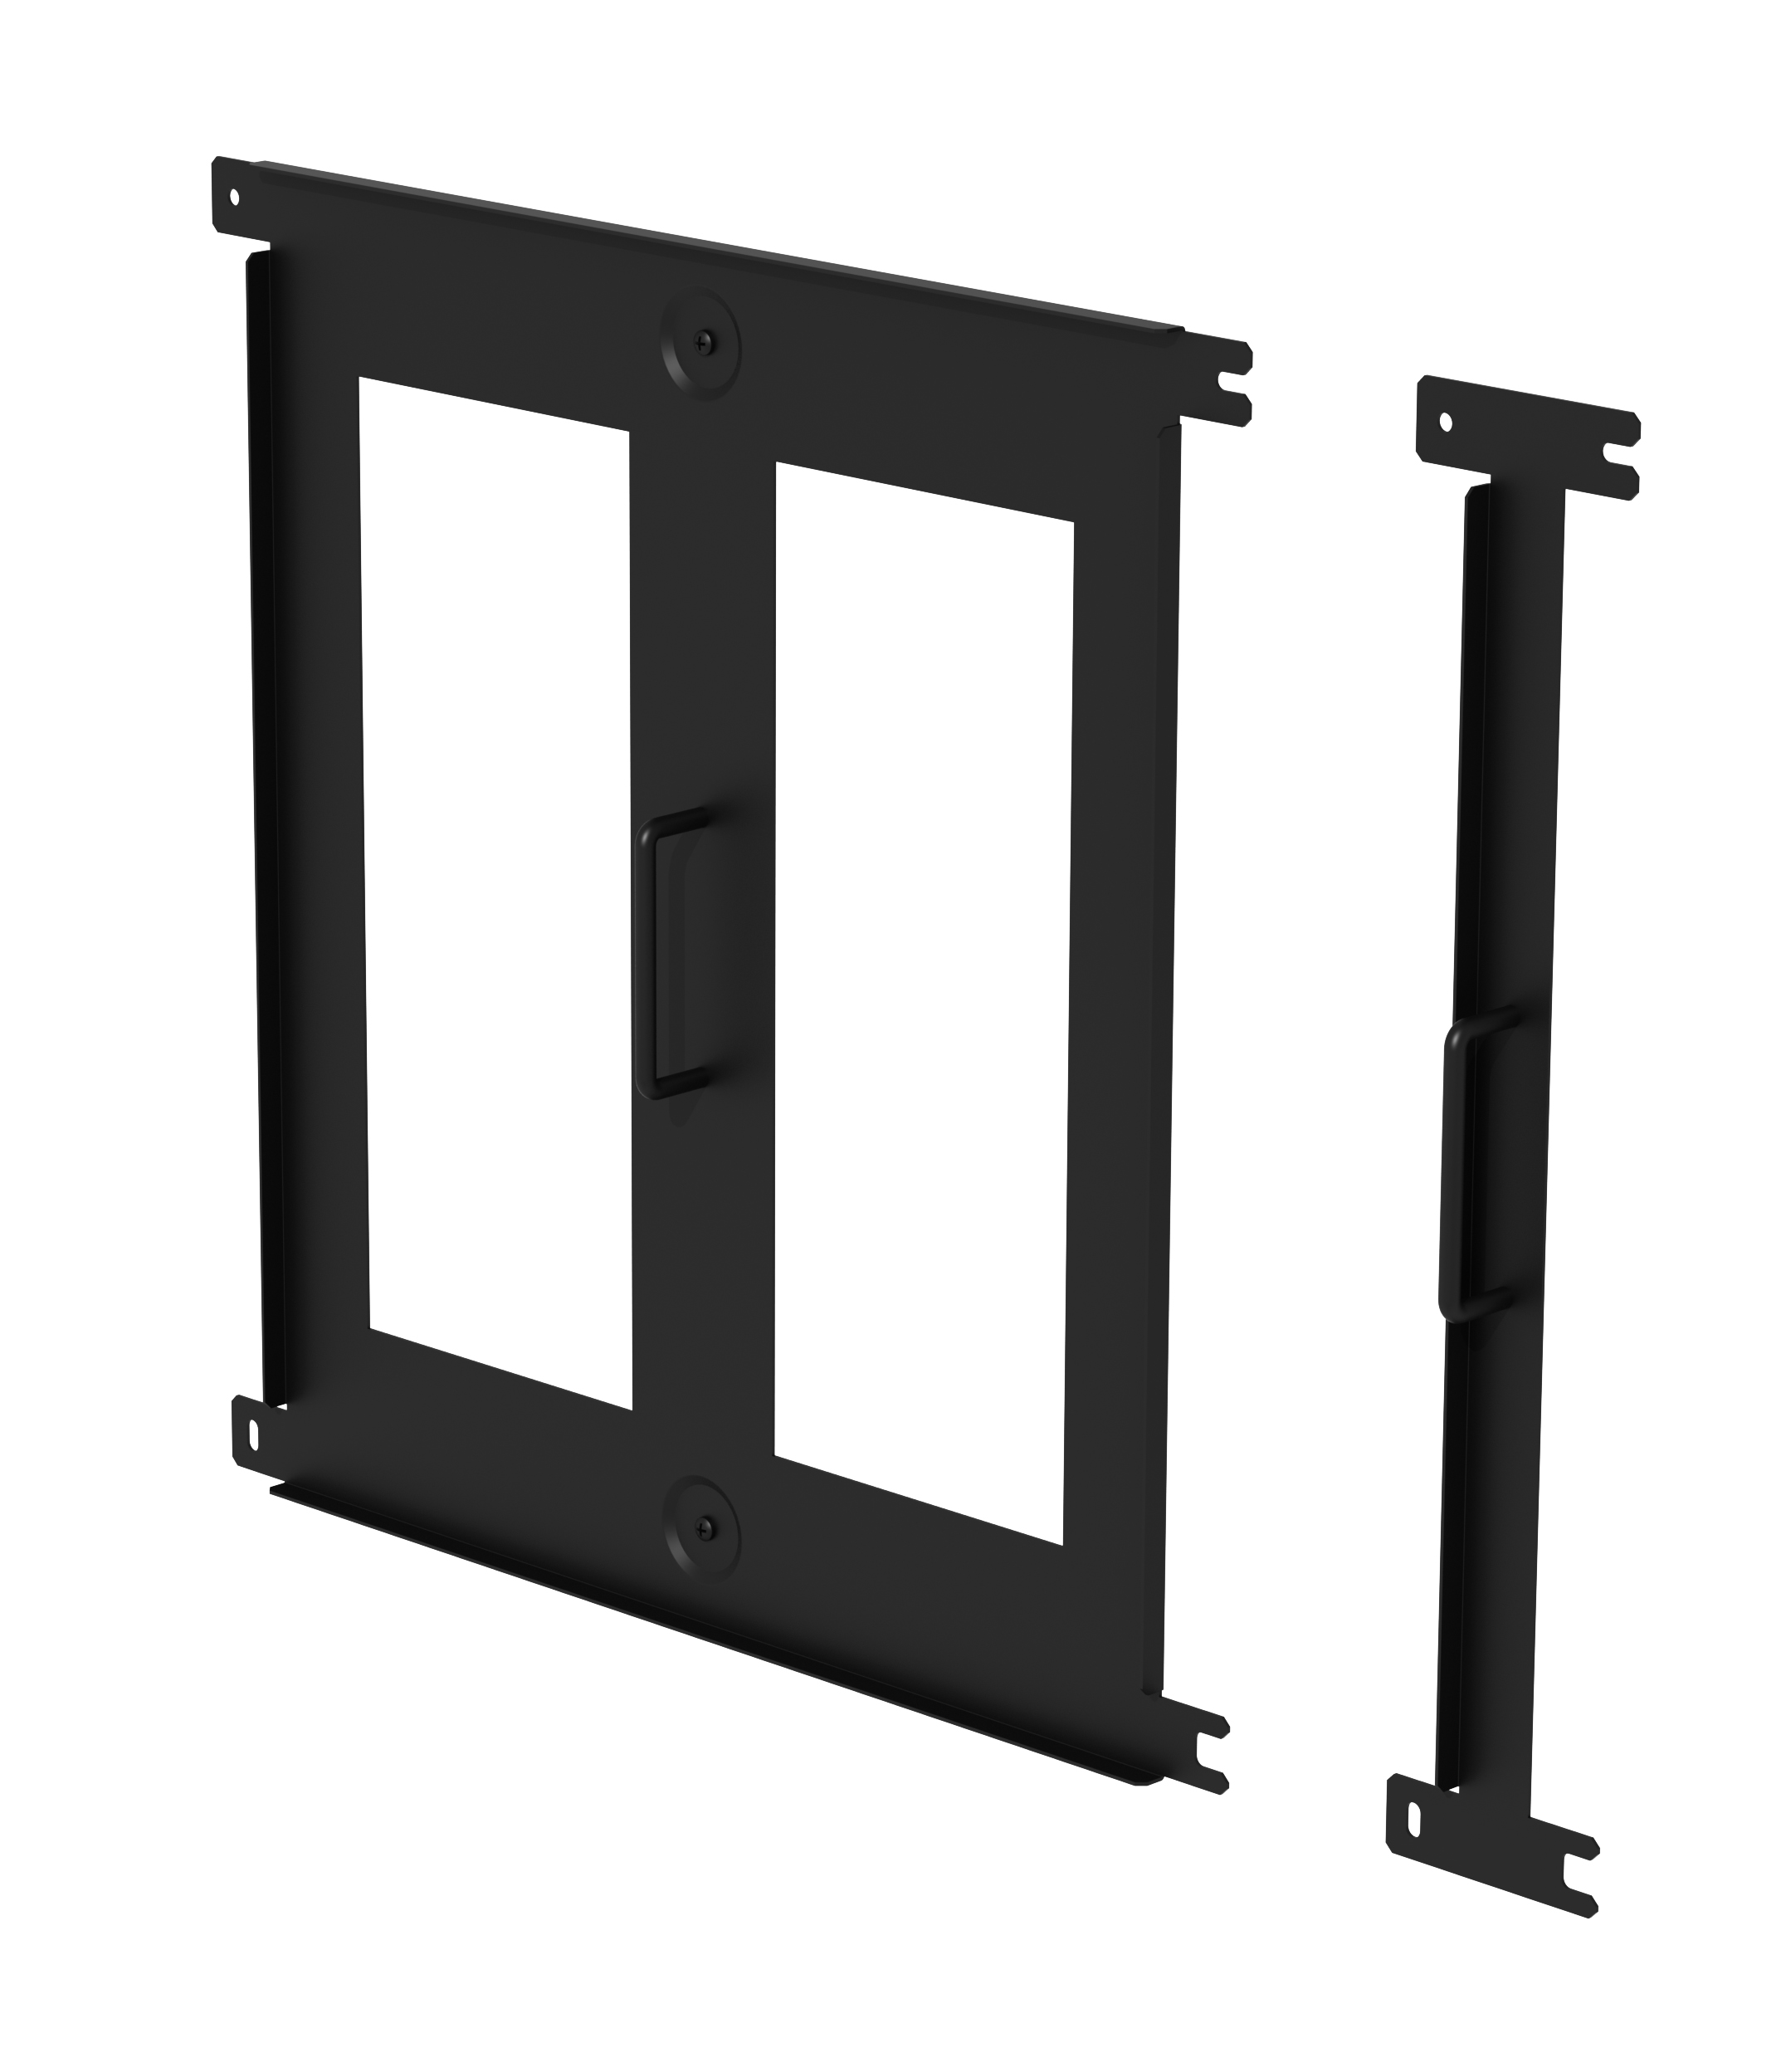 DS-VWRS040 Reusable Video Wall Spacer